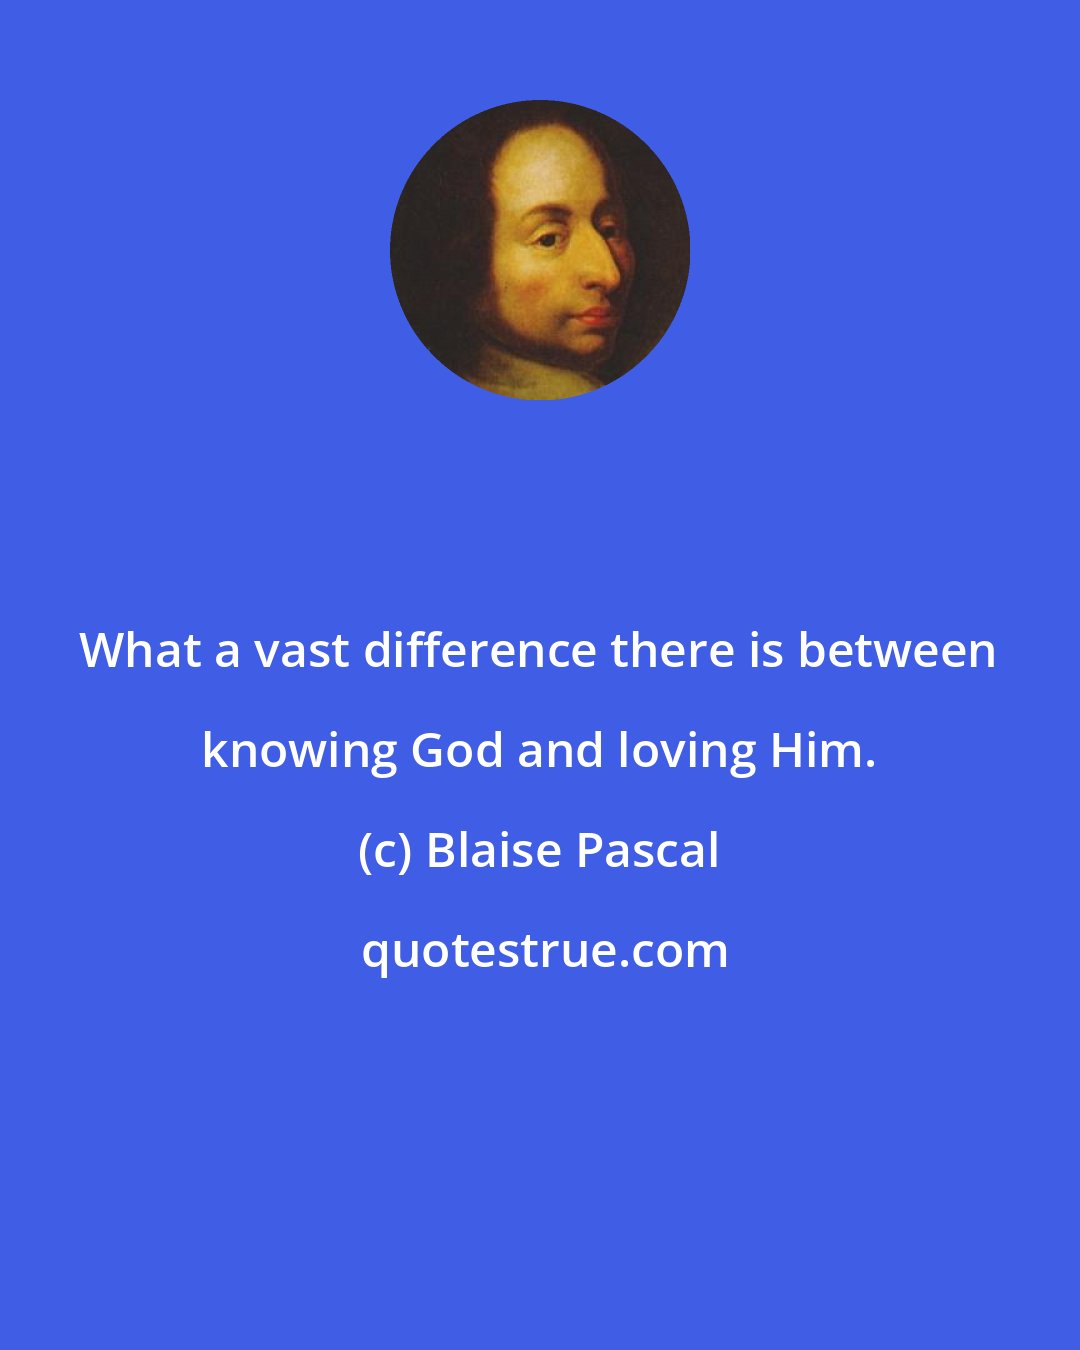 Blaise Pascal: What a vast difference there is between knowing God and loving Him.